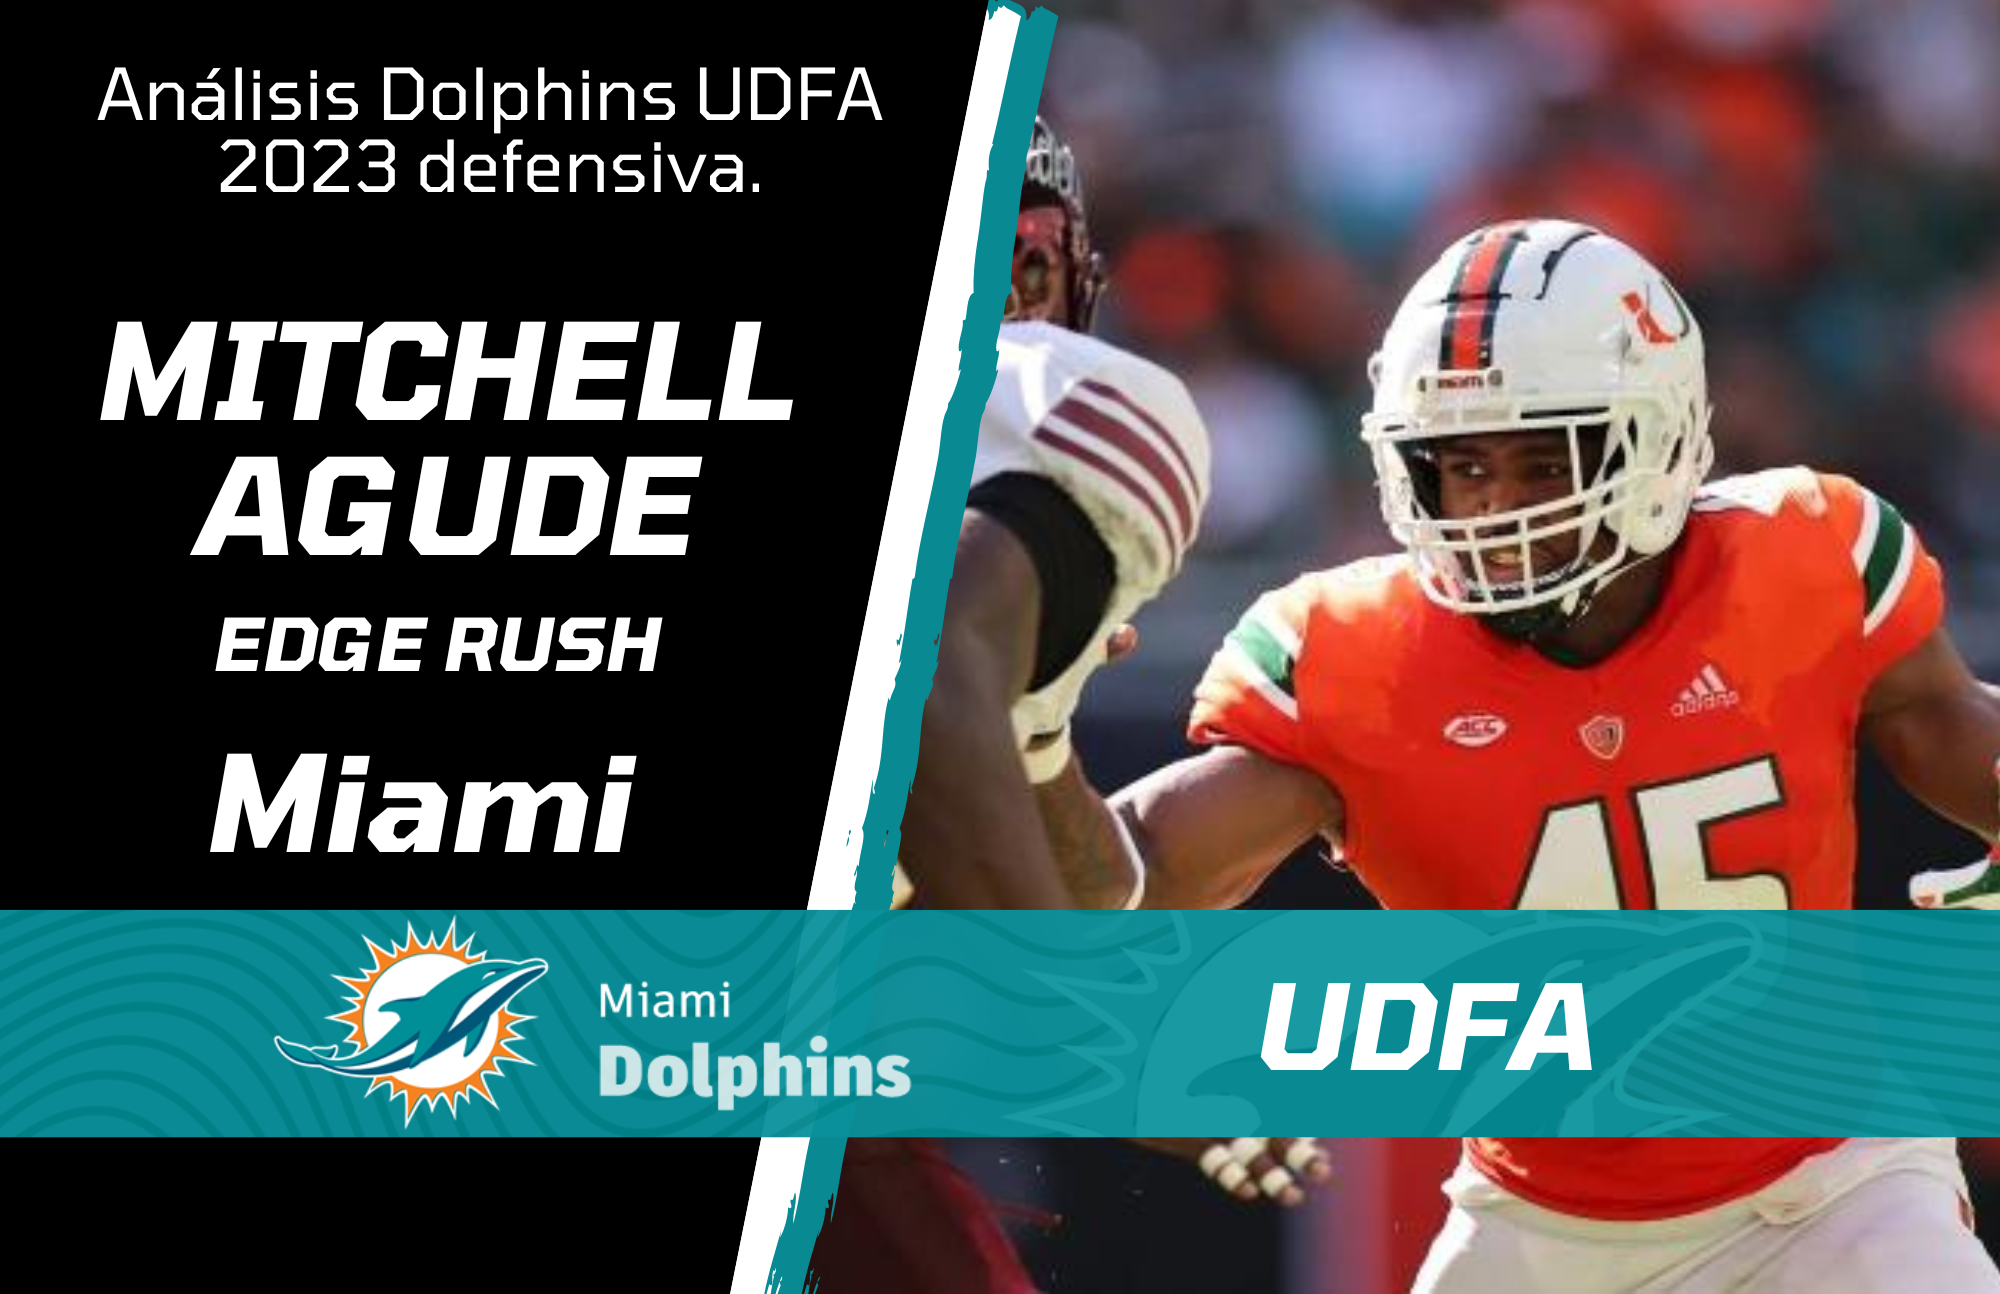 Former Miami defensive end Mitchell Agude signs UDFA with Dolphins, Mitchell Agude, Edge, Miami, Miami Hurricanes DE Mitchell Agude, Mitchell Agude Dolphins 